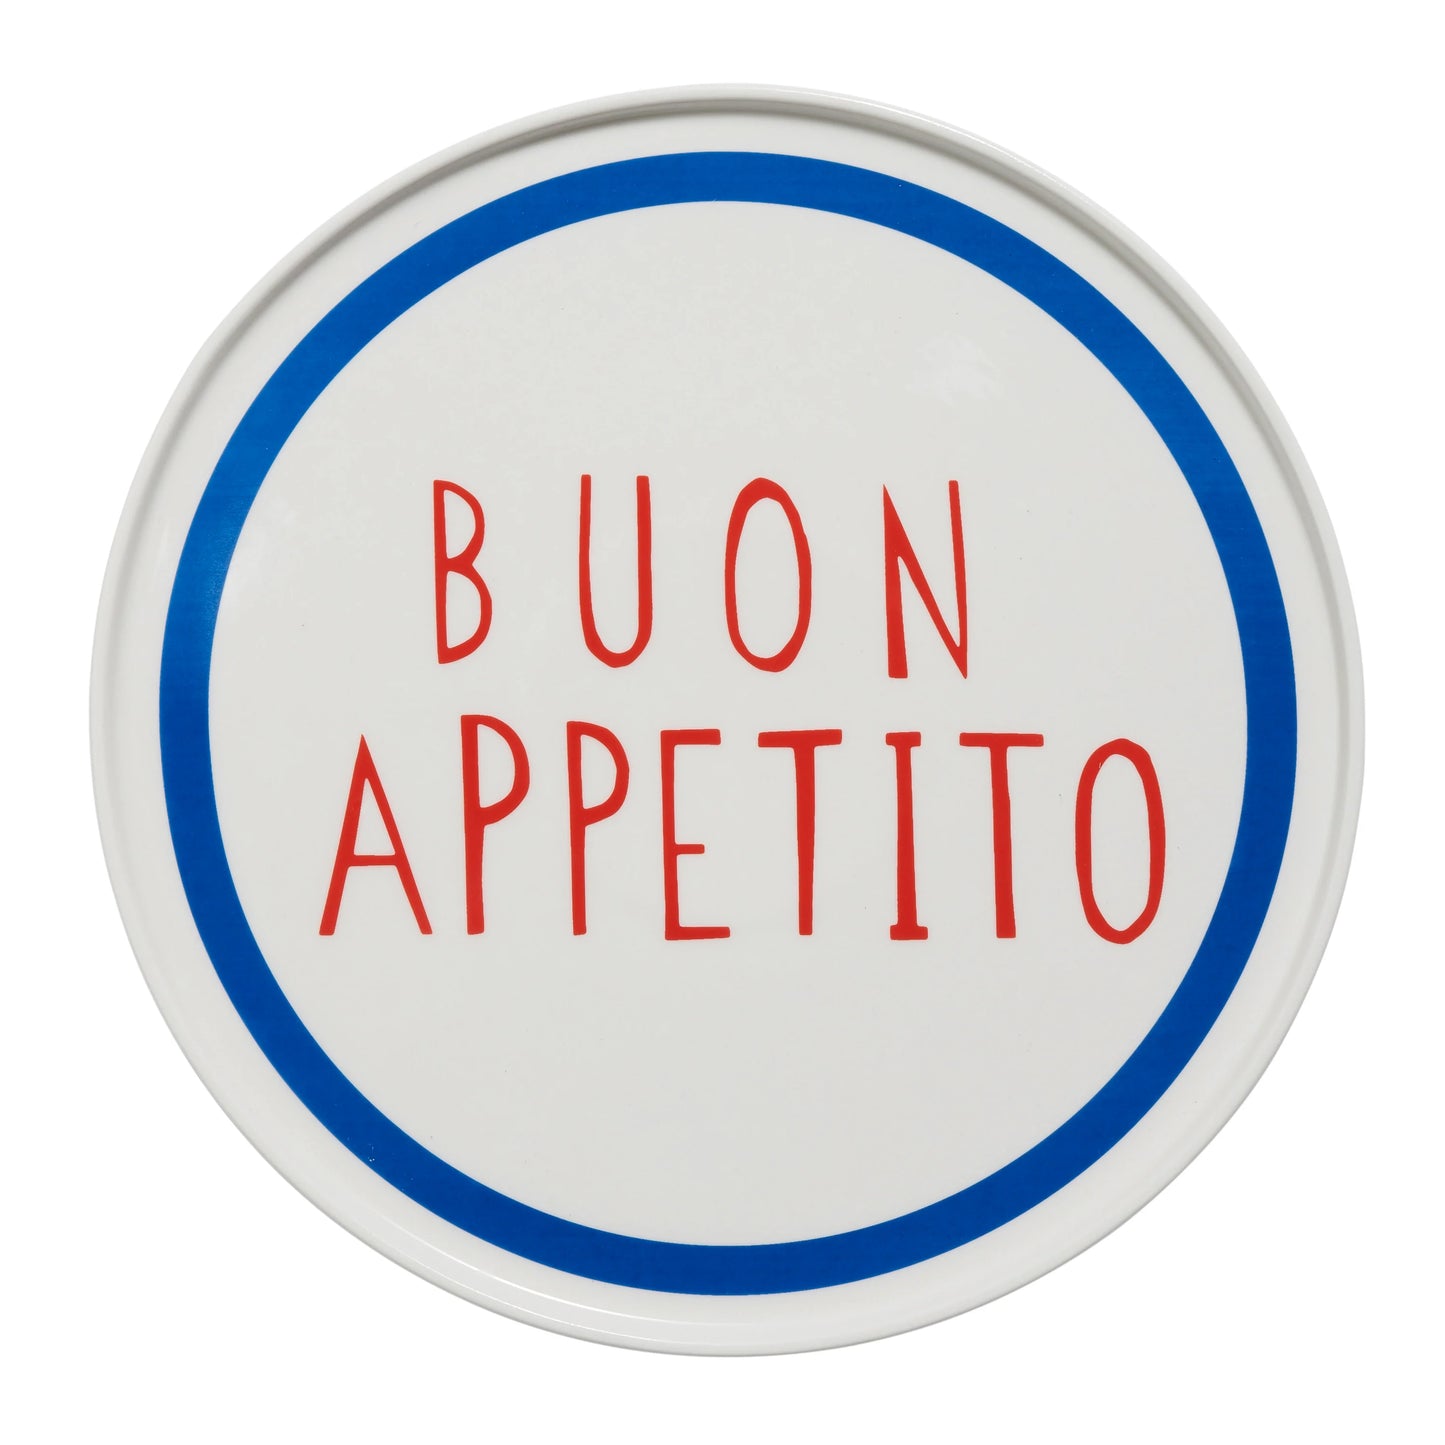 Buon Appetito Plate - CLICK & COLLECT ONLY